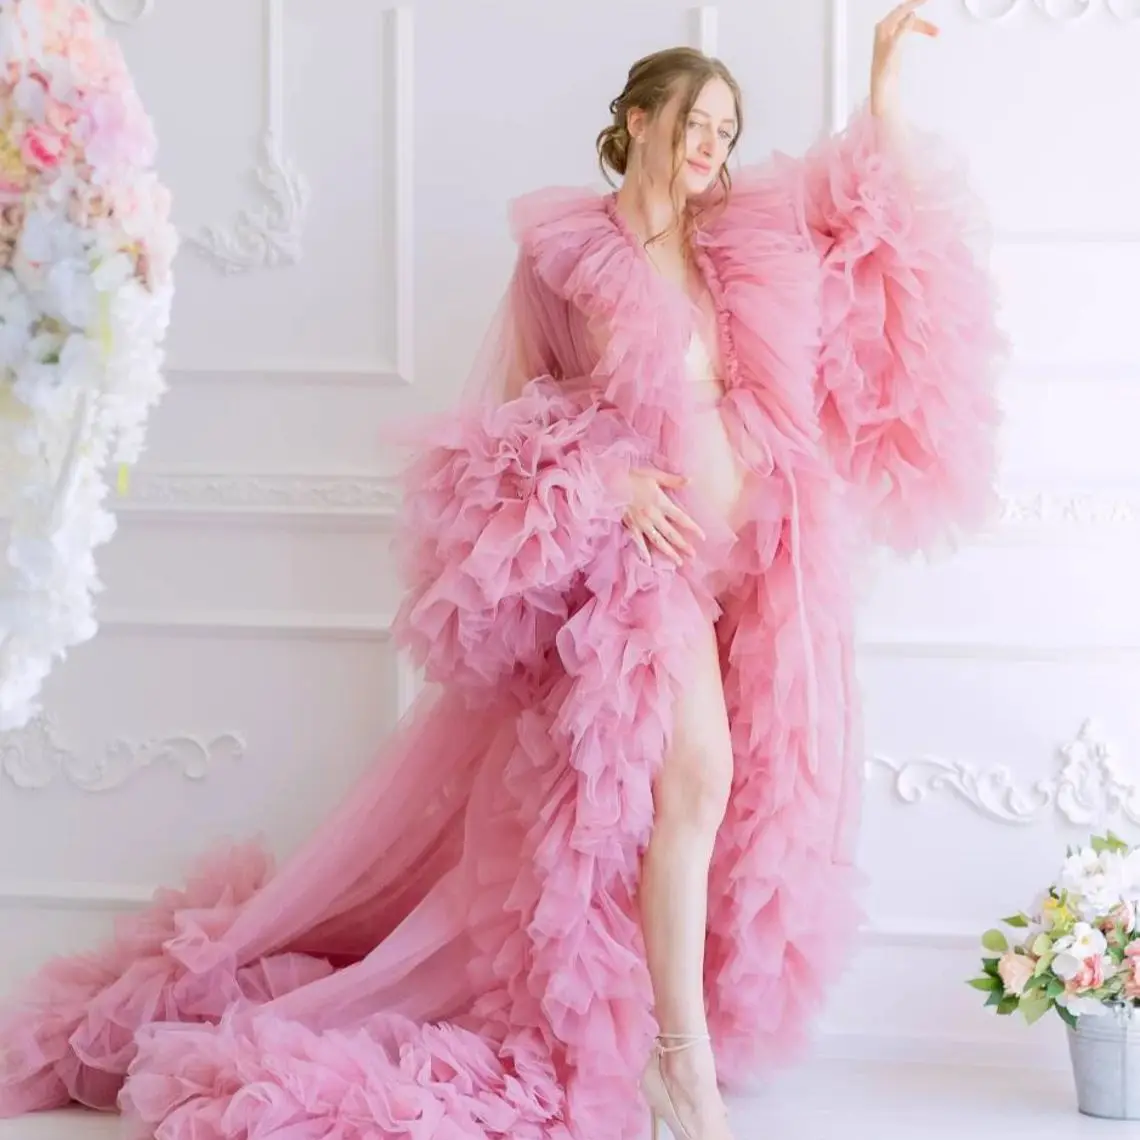 

Tiered Ruffled Tulle Maternity Dress With Train For Photoshoot Long Puffy Sleeves Pregnancy Gown Luxury Robes For Babyshower